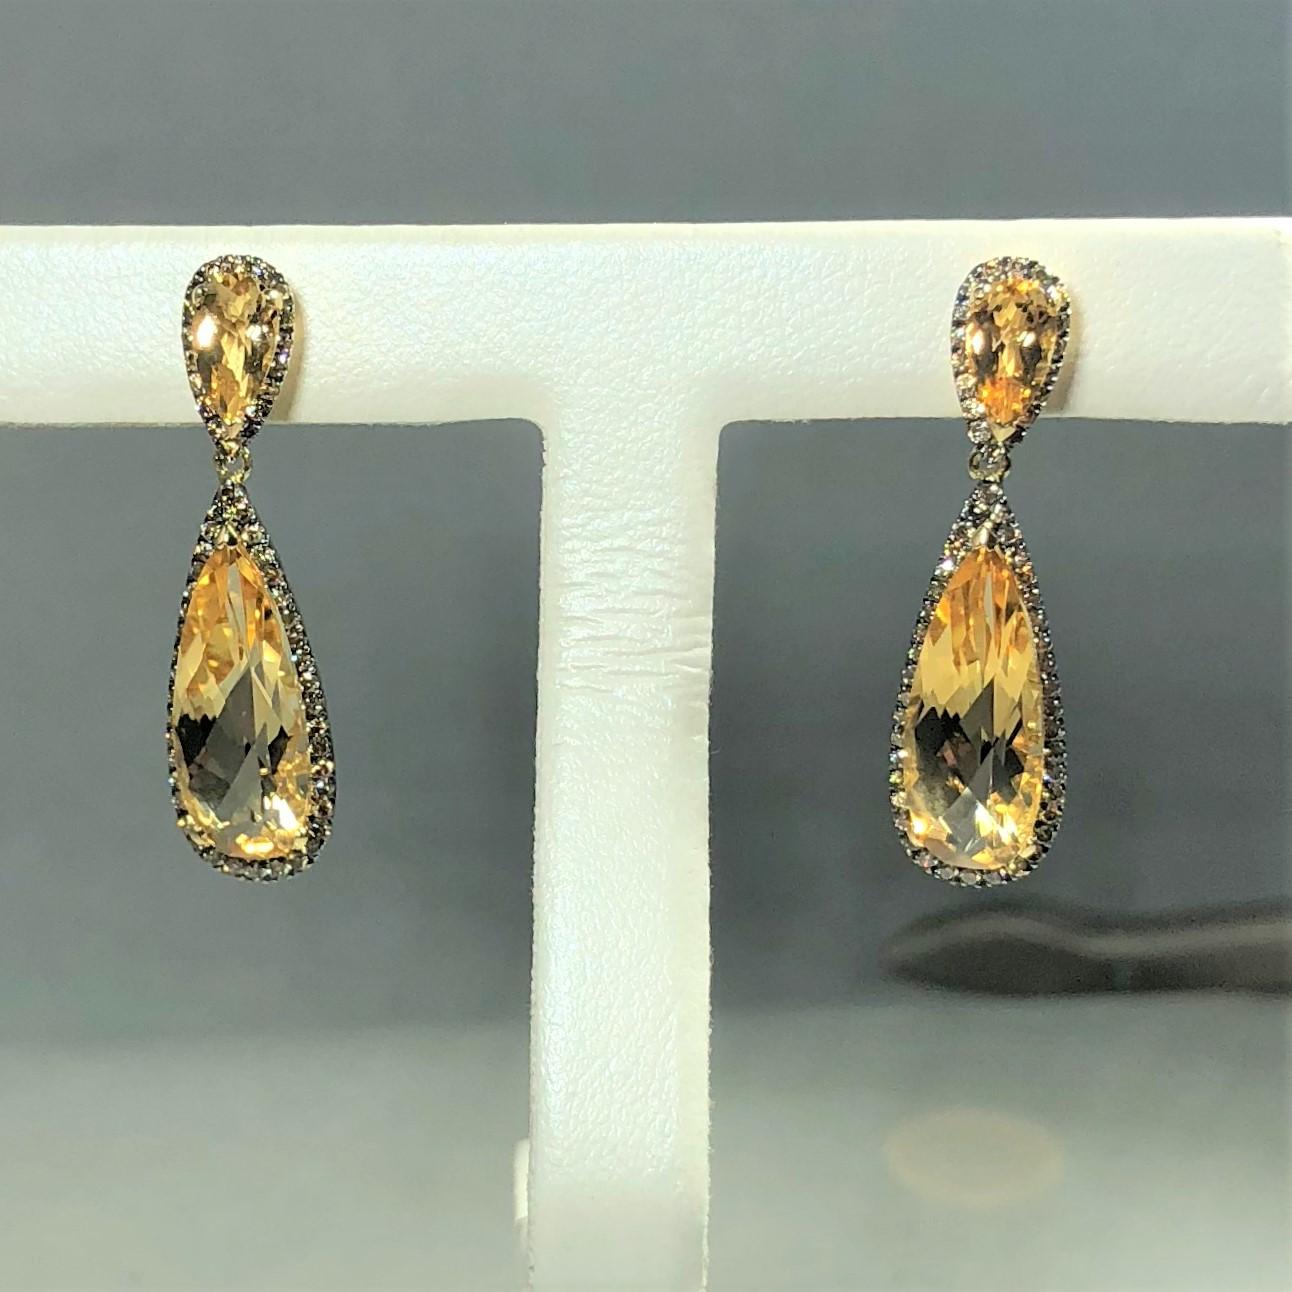 Celebrity 18 kt yellow gold Cognac diamond and citrine drop earrings. These gorgeous earrings are created in 18 karat yellow gold, weight 5.4 grams. Round Cognac diamonds surround two pear shaped  pale yellow/ orange Citrine. Total carat weight for